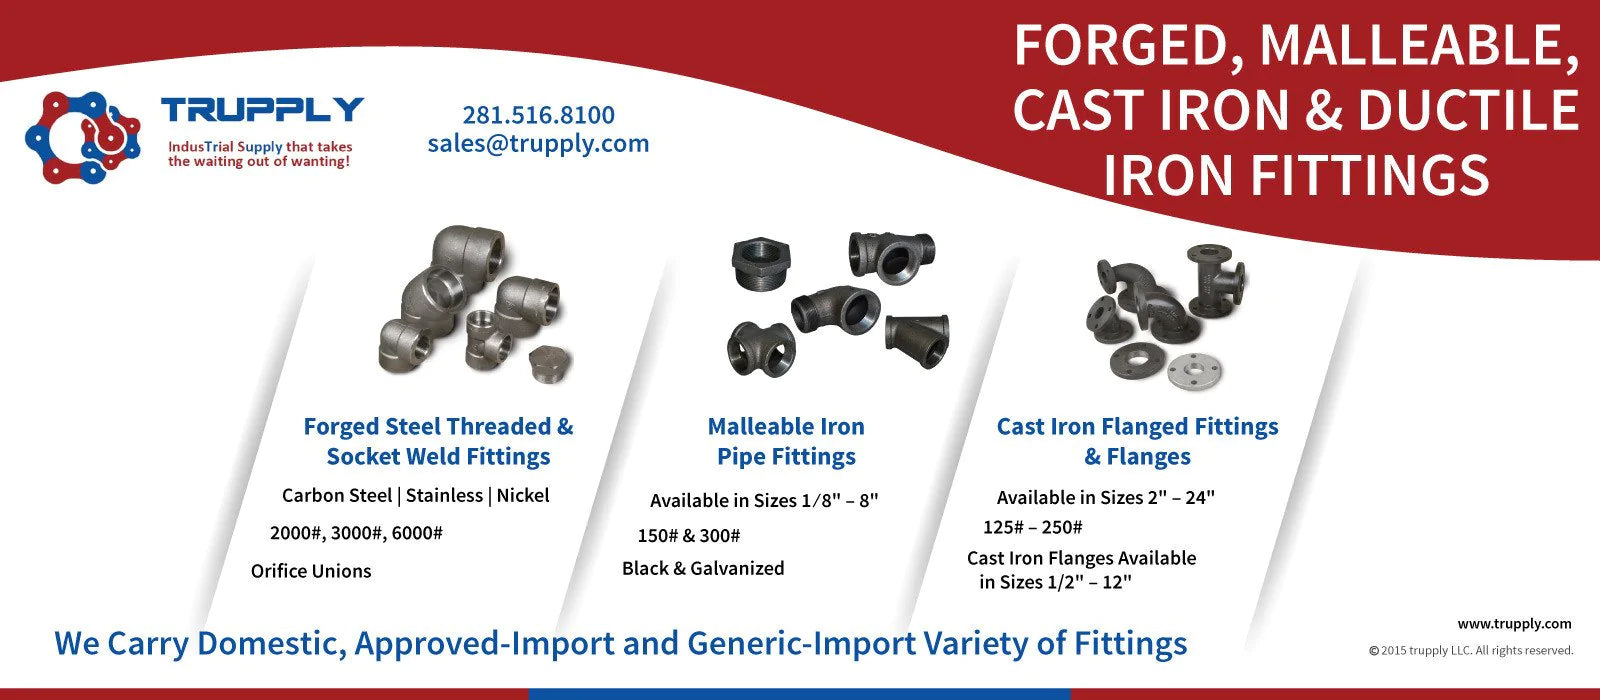 Forged, Malleable, Cast Iron & Ductile Iron Fittings